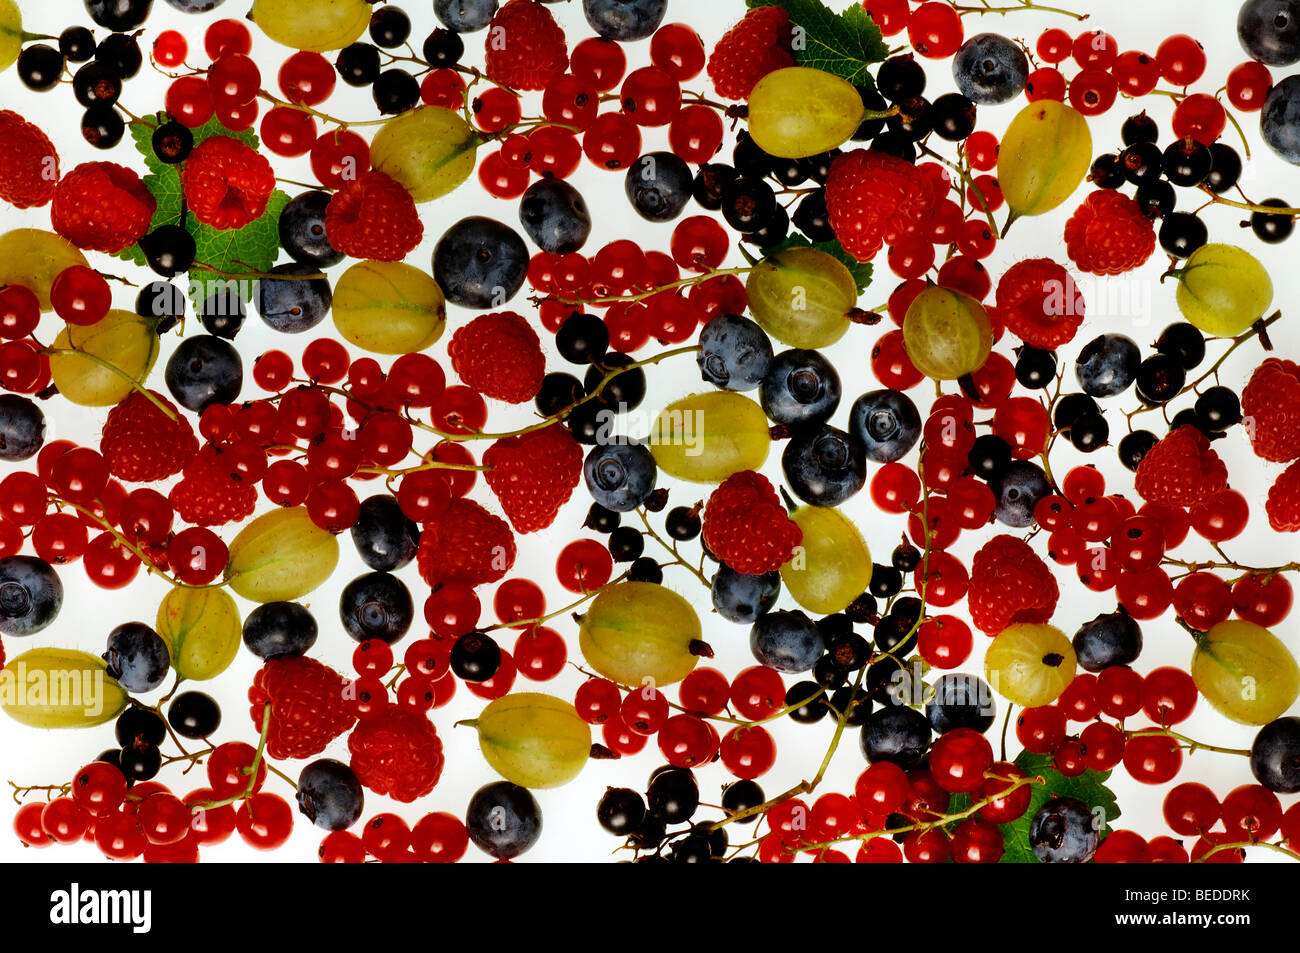 Different kinds of fruit, raspberries, gooseberries, red and black currants, blueberries Stock Photo